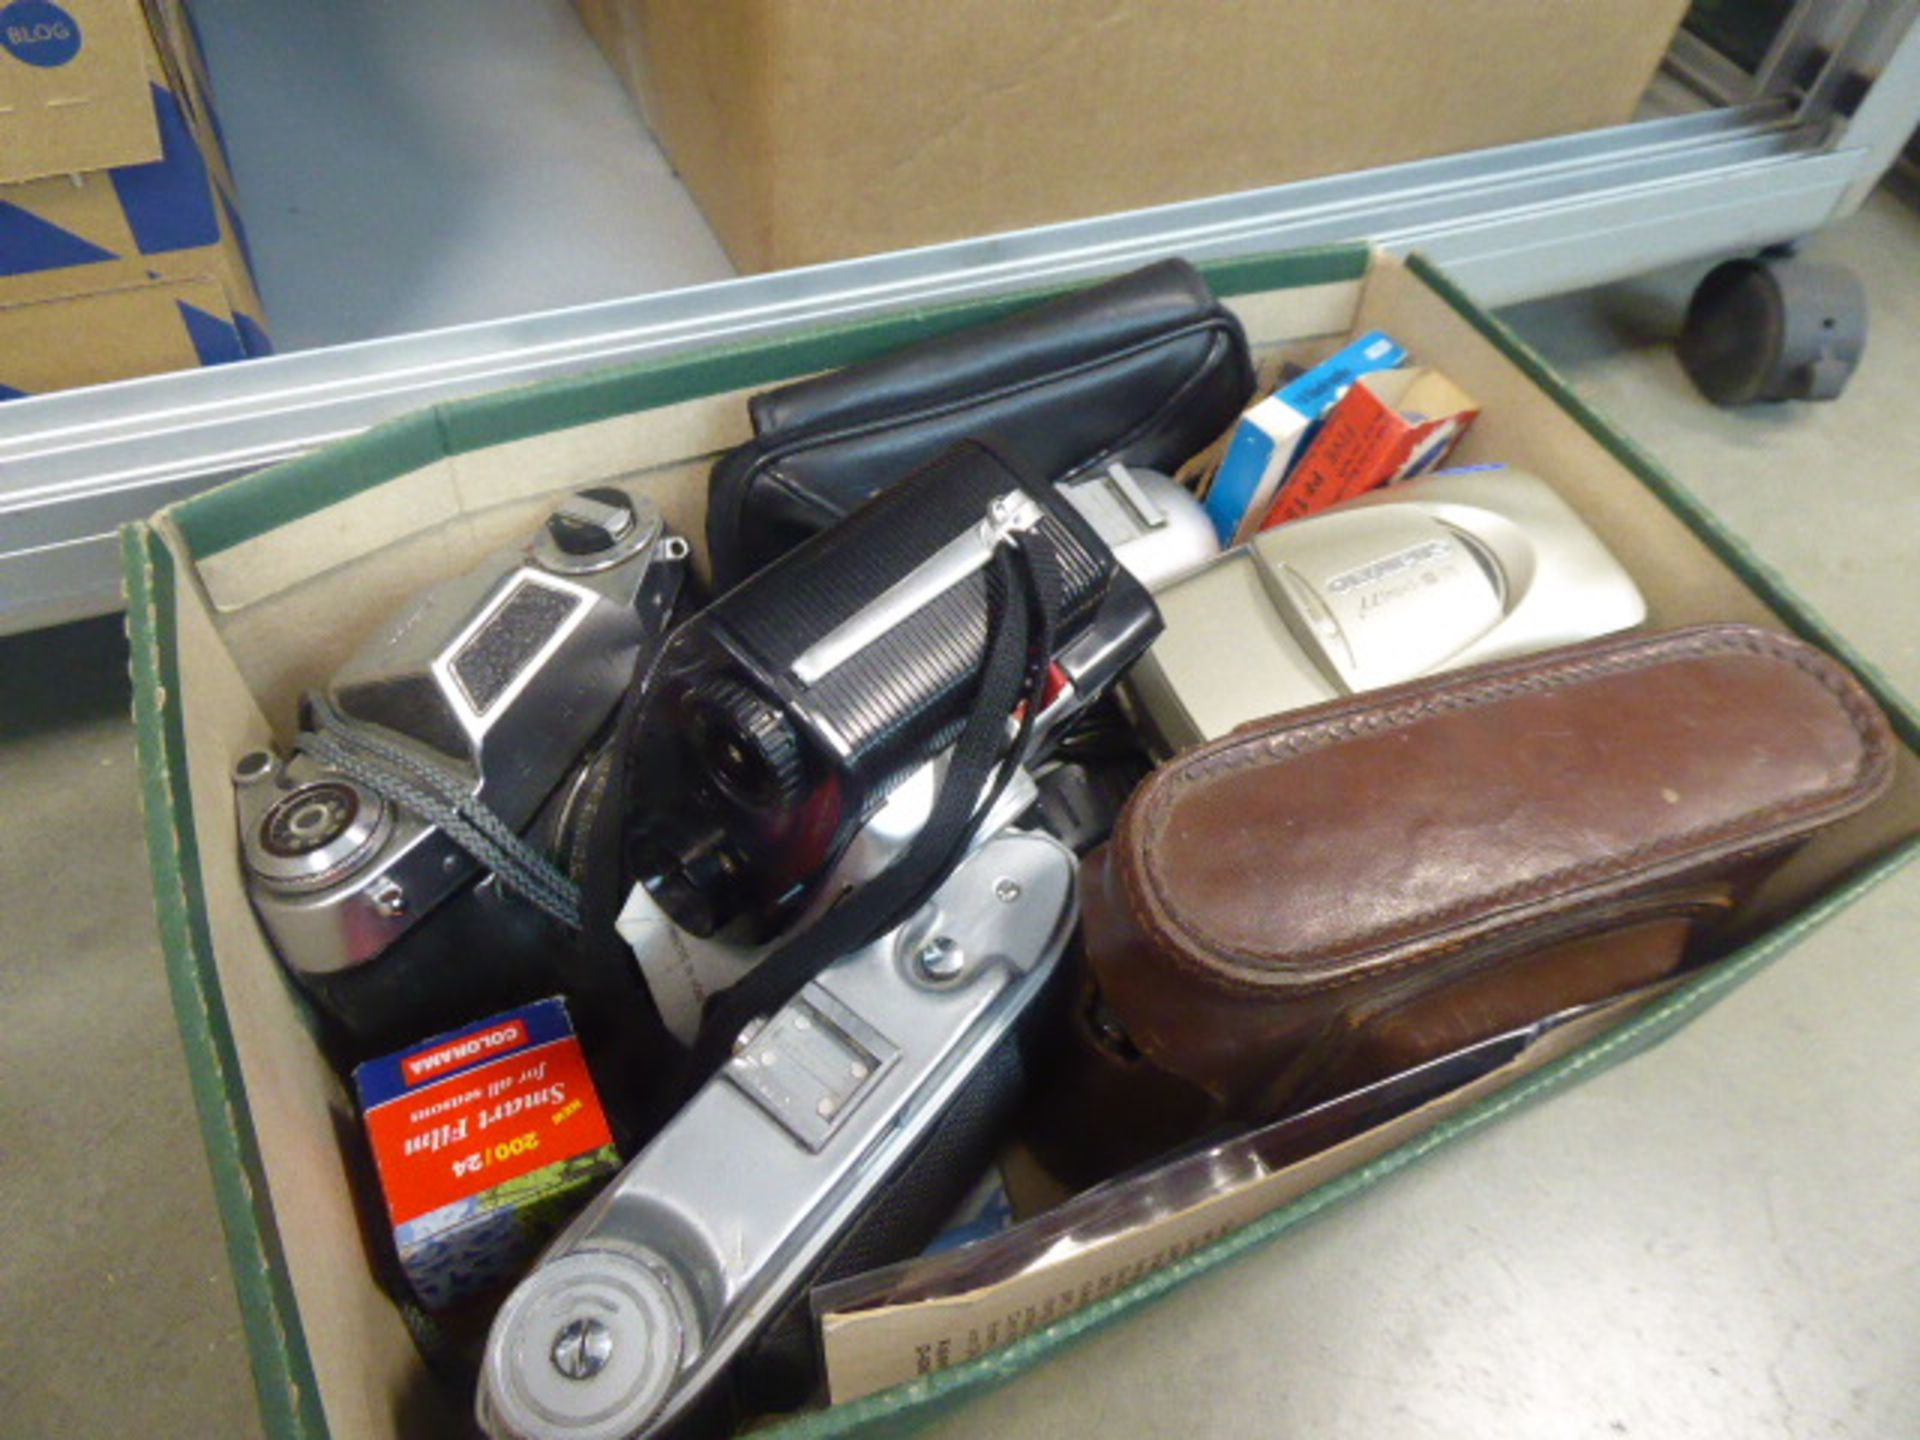 Box containing loose vintage film cameras and accessories